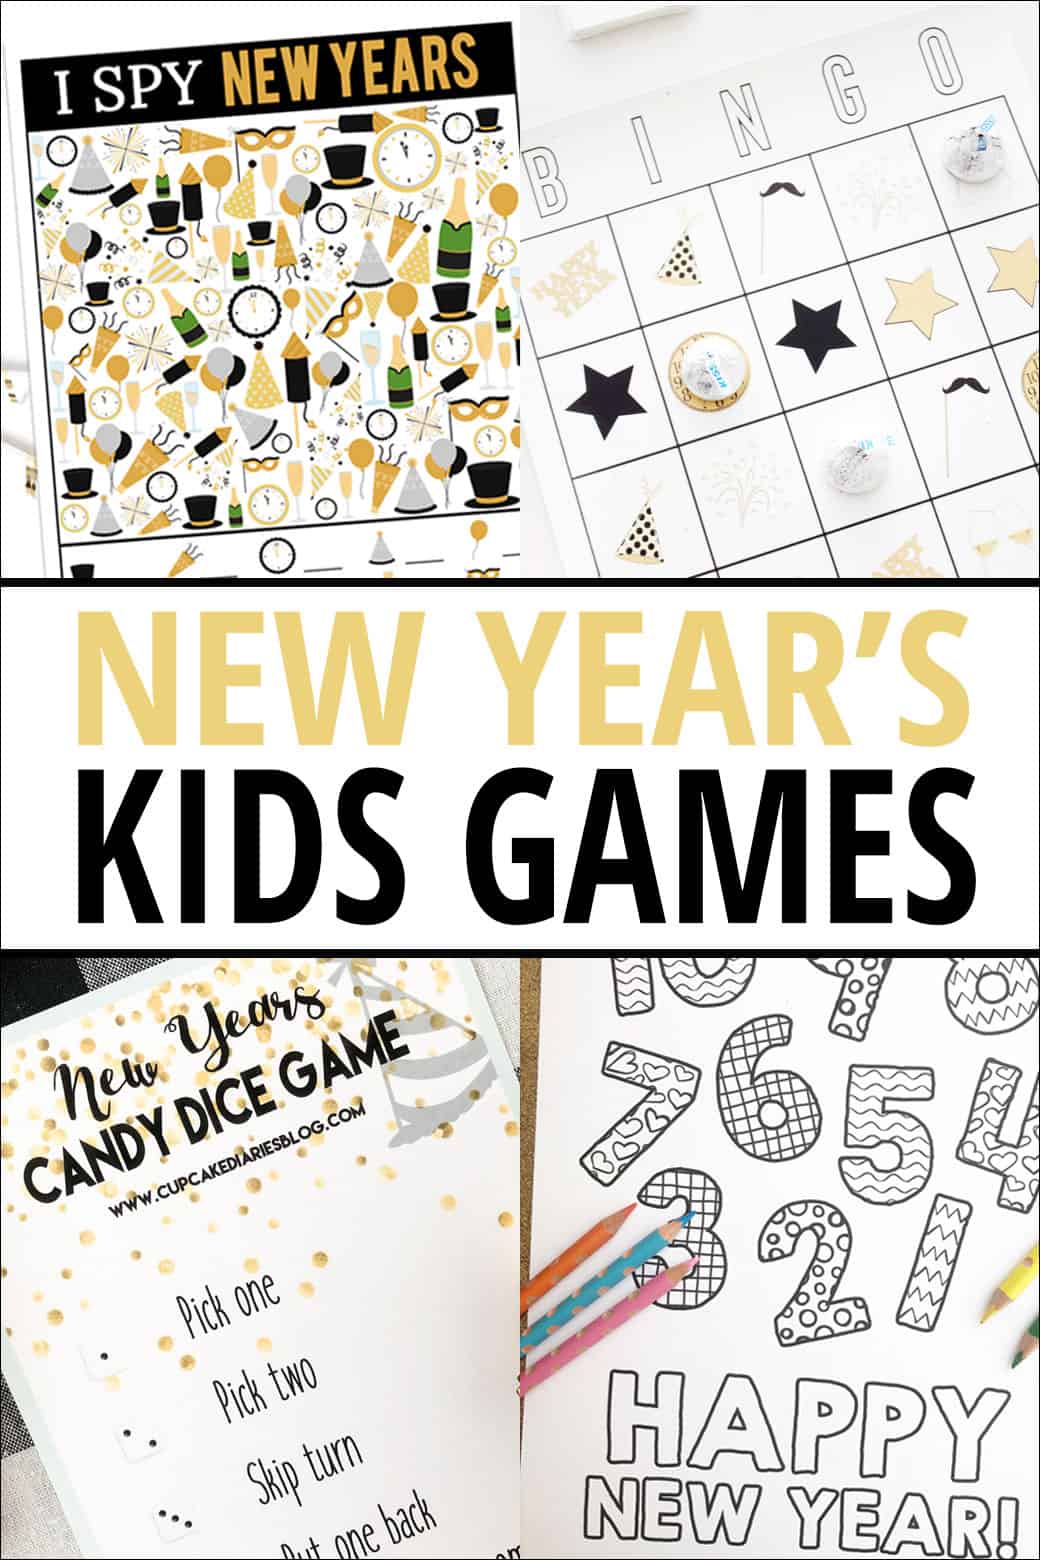 New Years Printable Games for Kids - these printable games are sure to make your family New Years Party even more fun! From overthebigmoon.com!